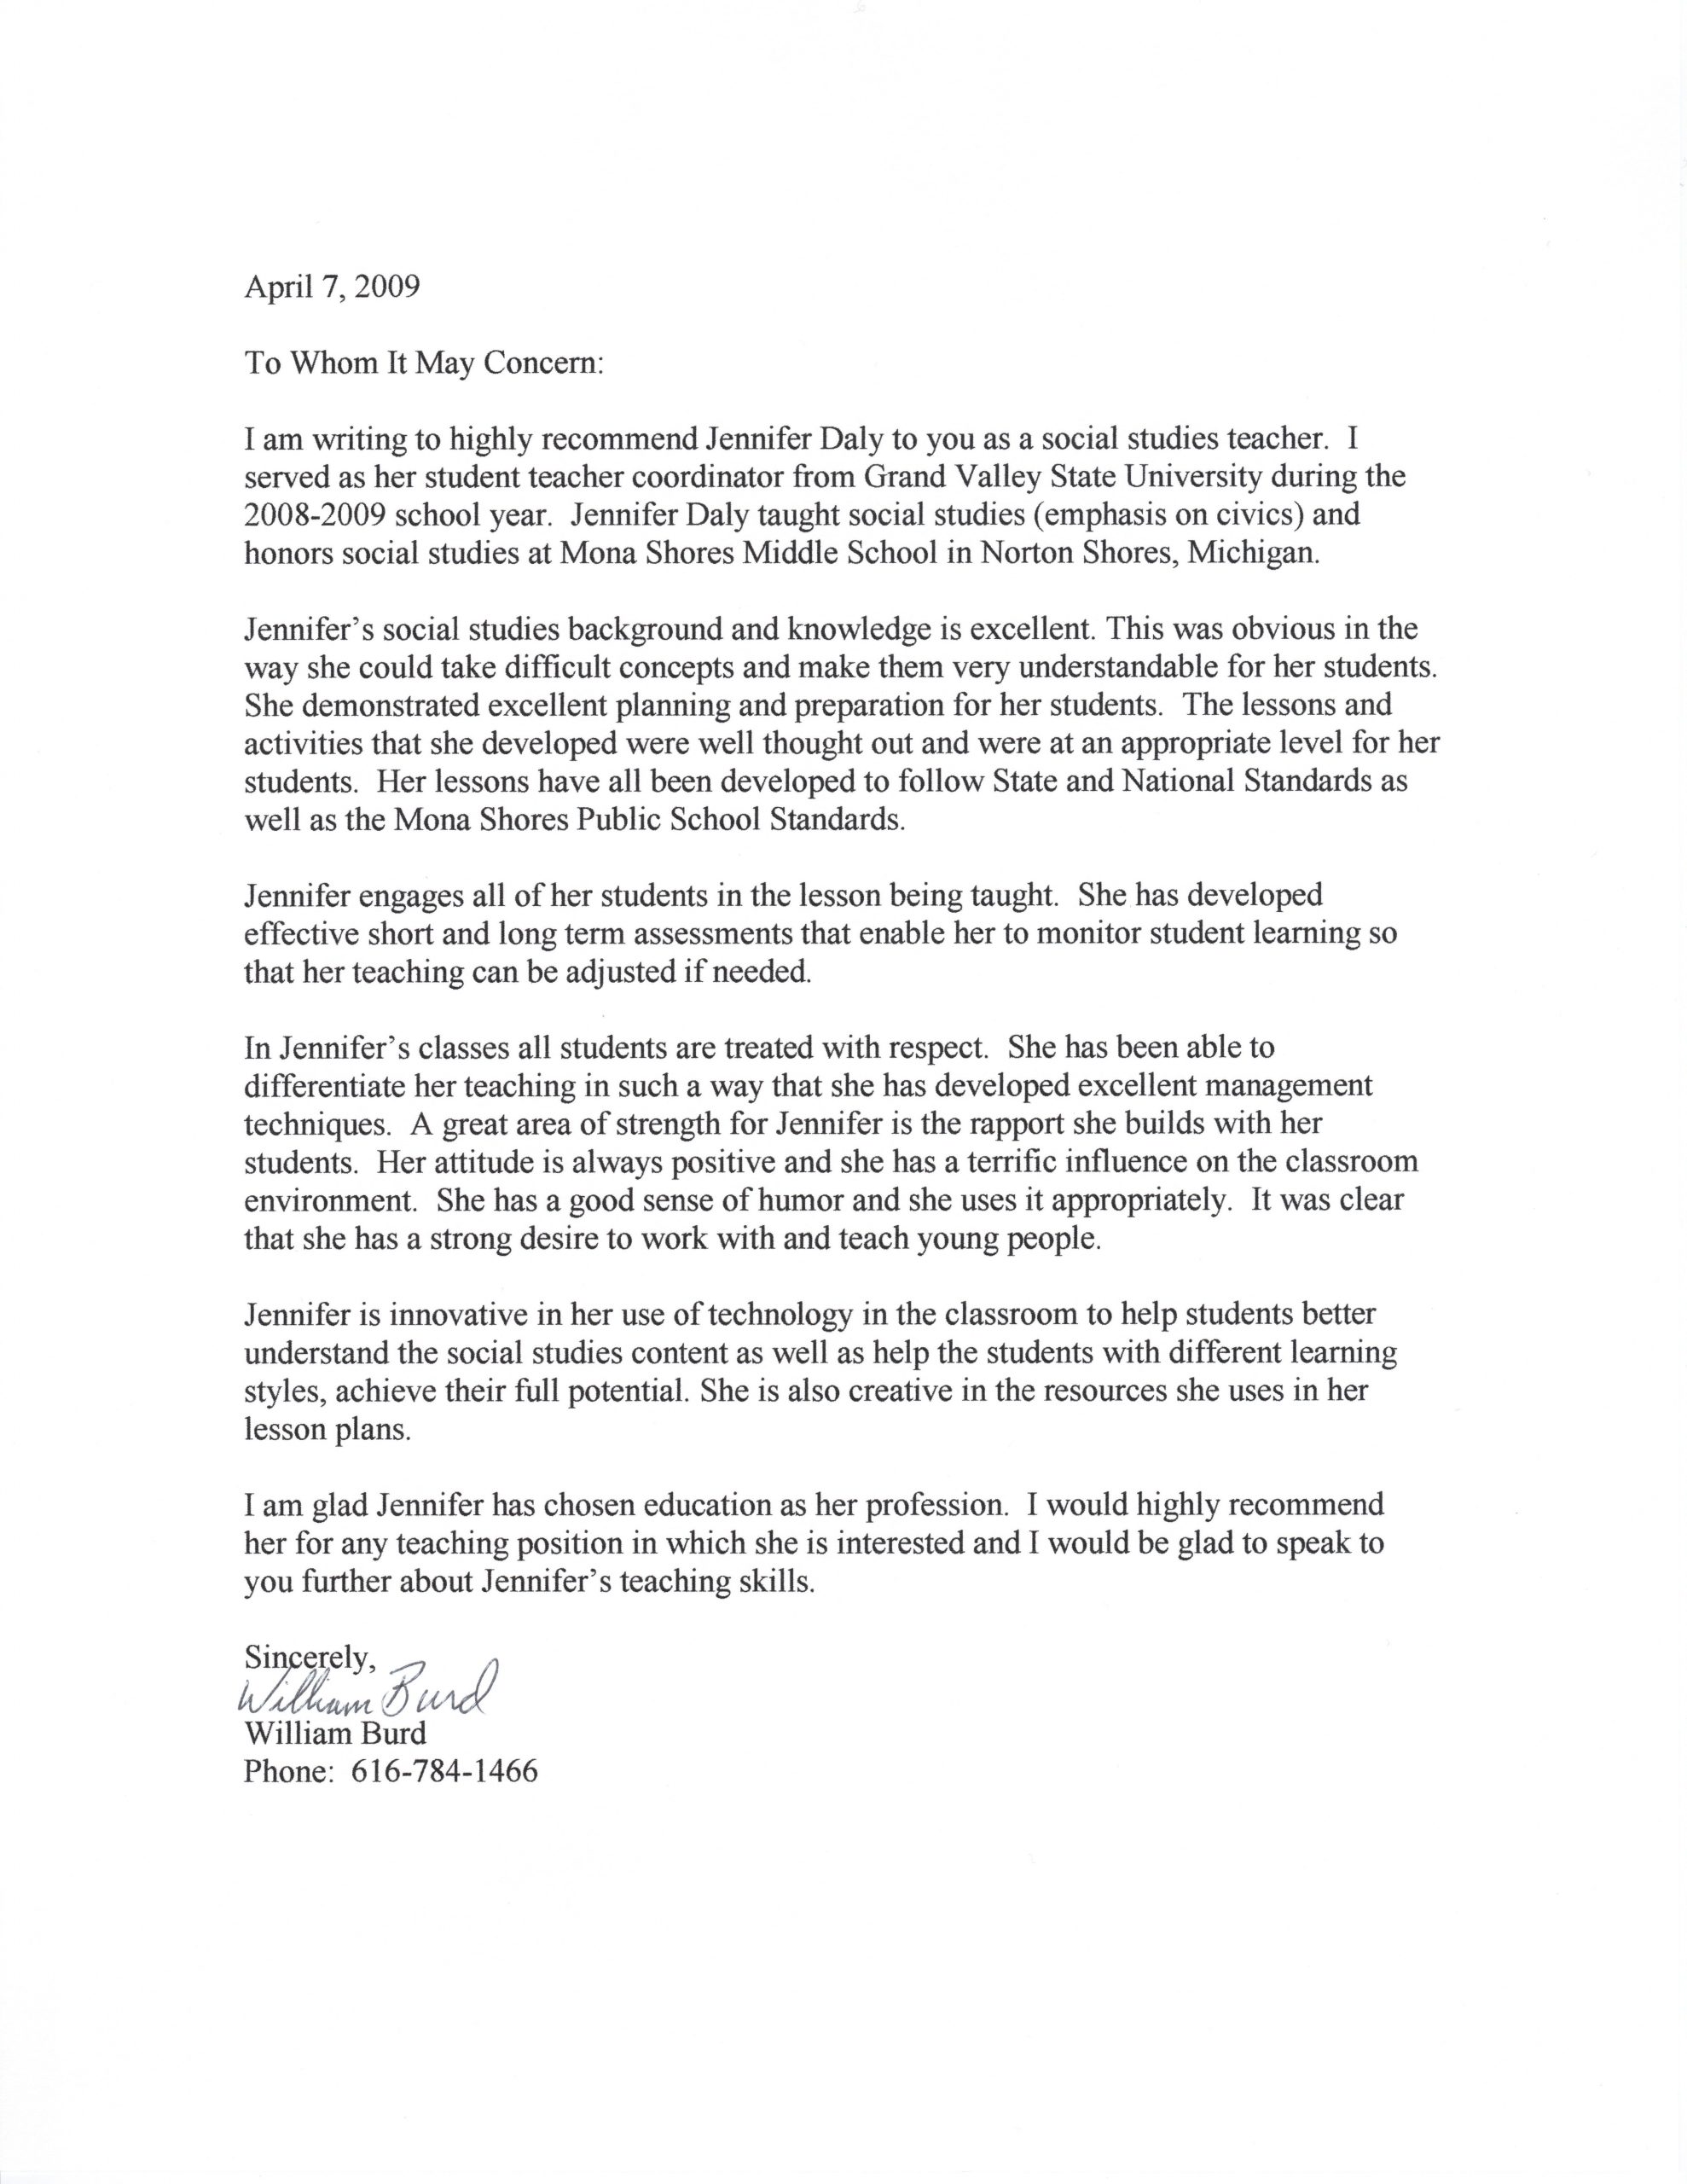 Student Teacher Recommendation Letter Examples Letter Of throughout sizing 5100 X 6600